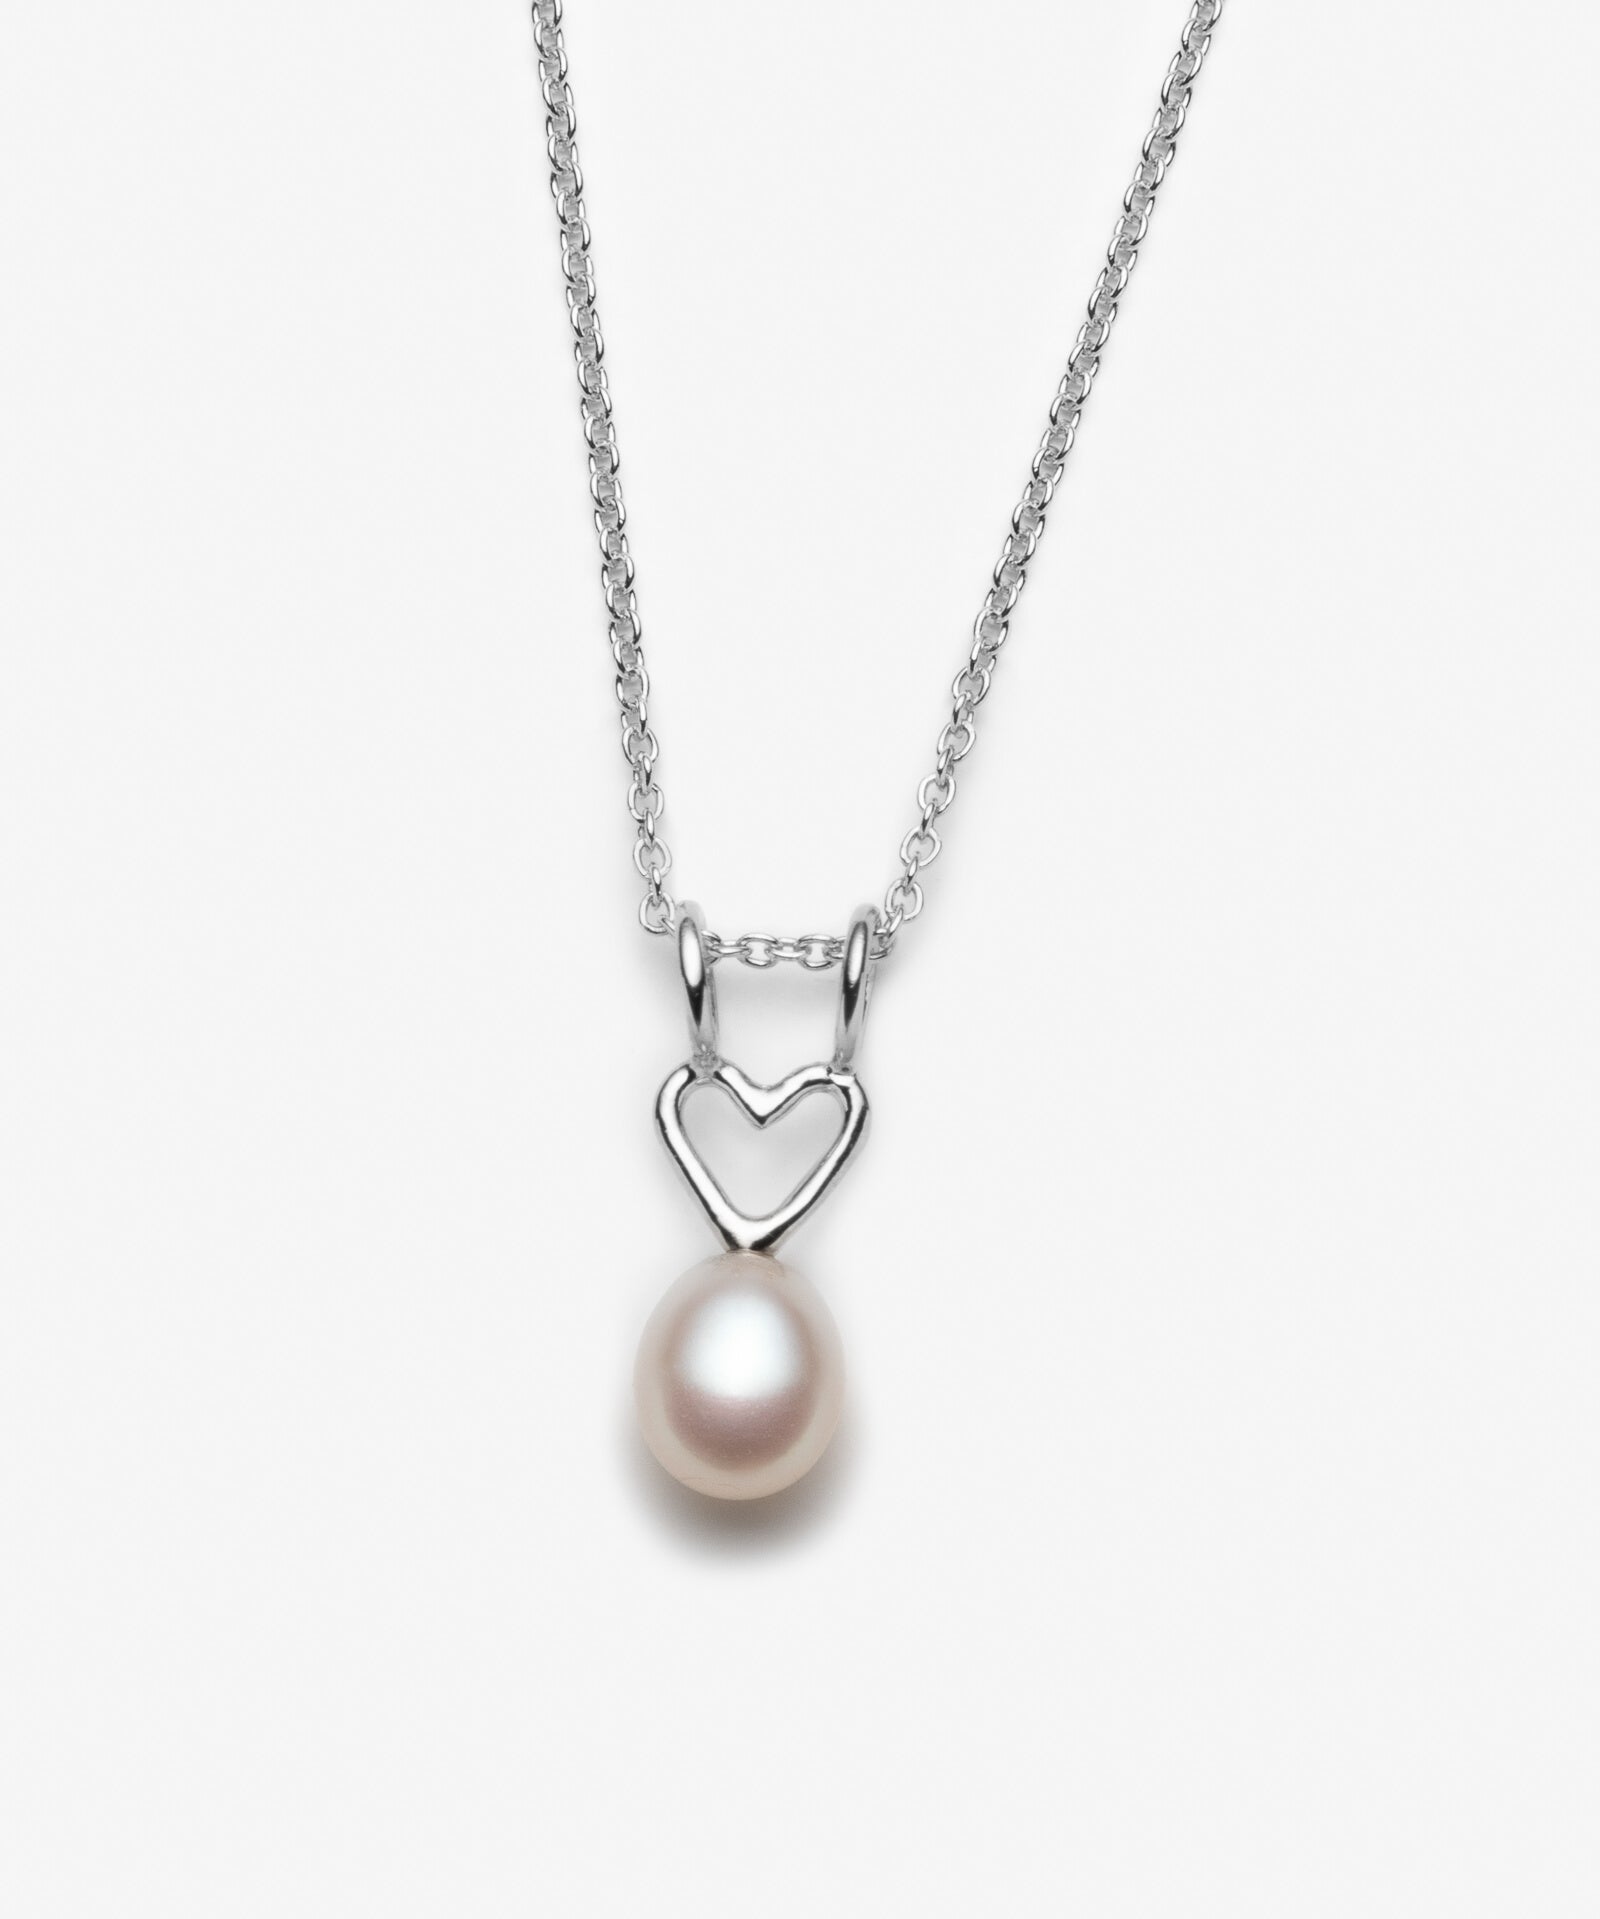 Heart and White Pearl Necklace - Jewelry for a Sister